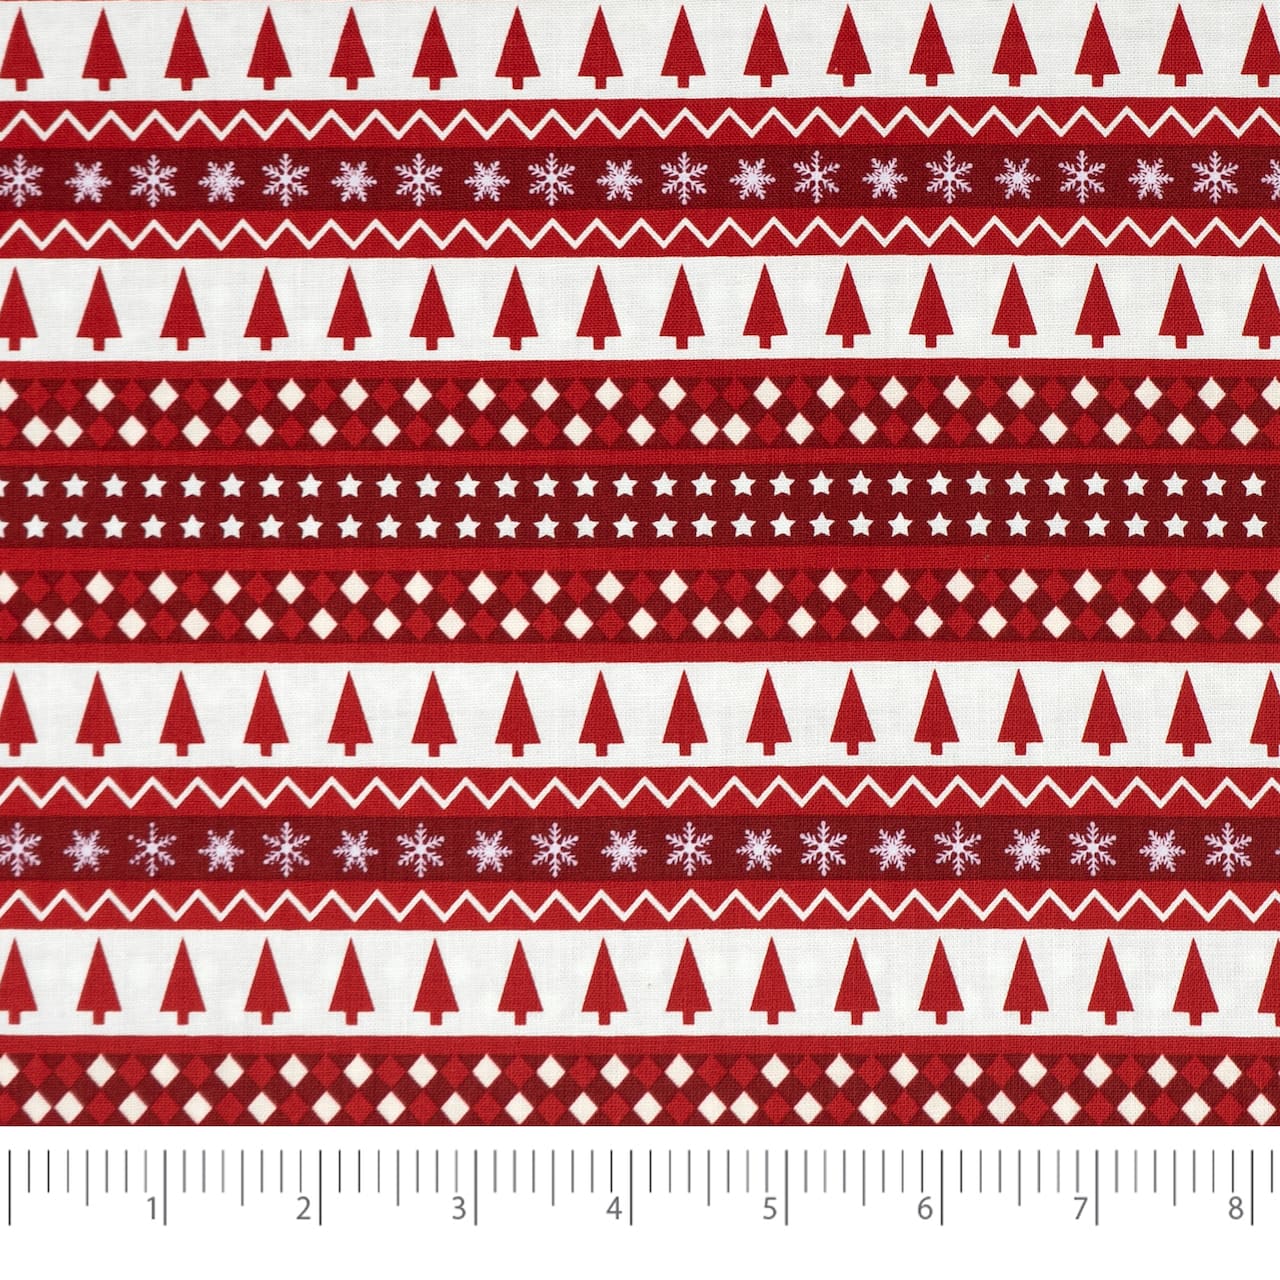 SINGER Christmas Holiday Penguins Trees Cotton Fabric